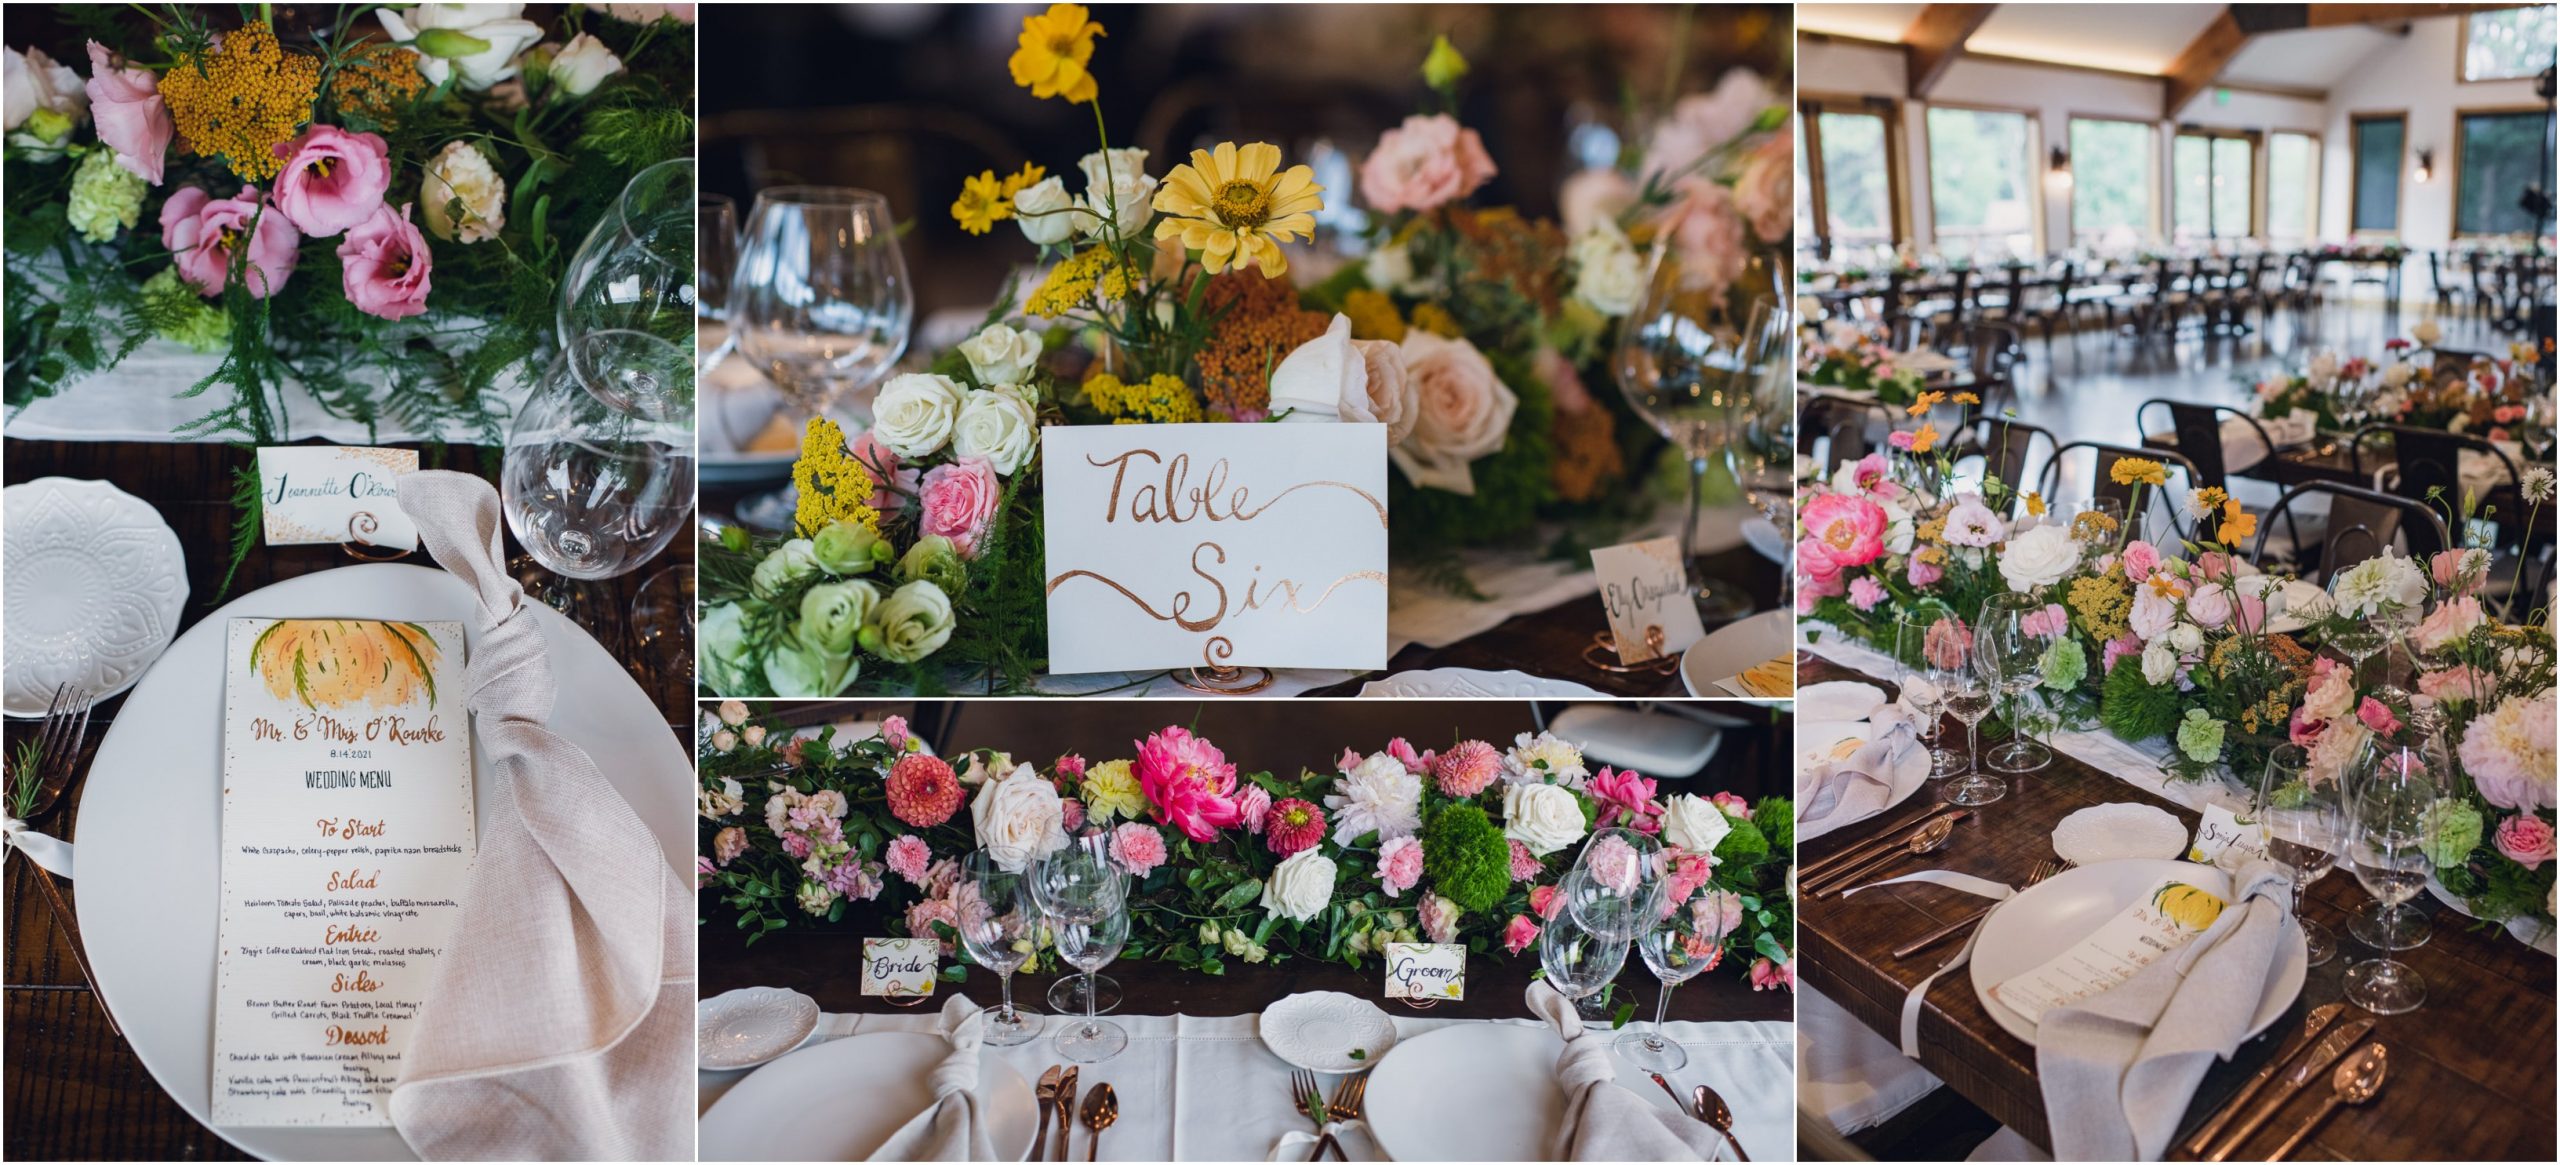 lush floral table runners for wedding reception at the landings in estes park colorado